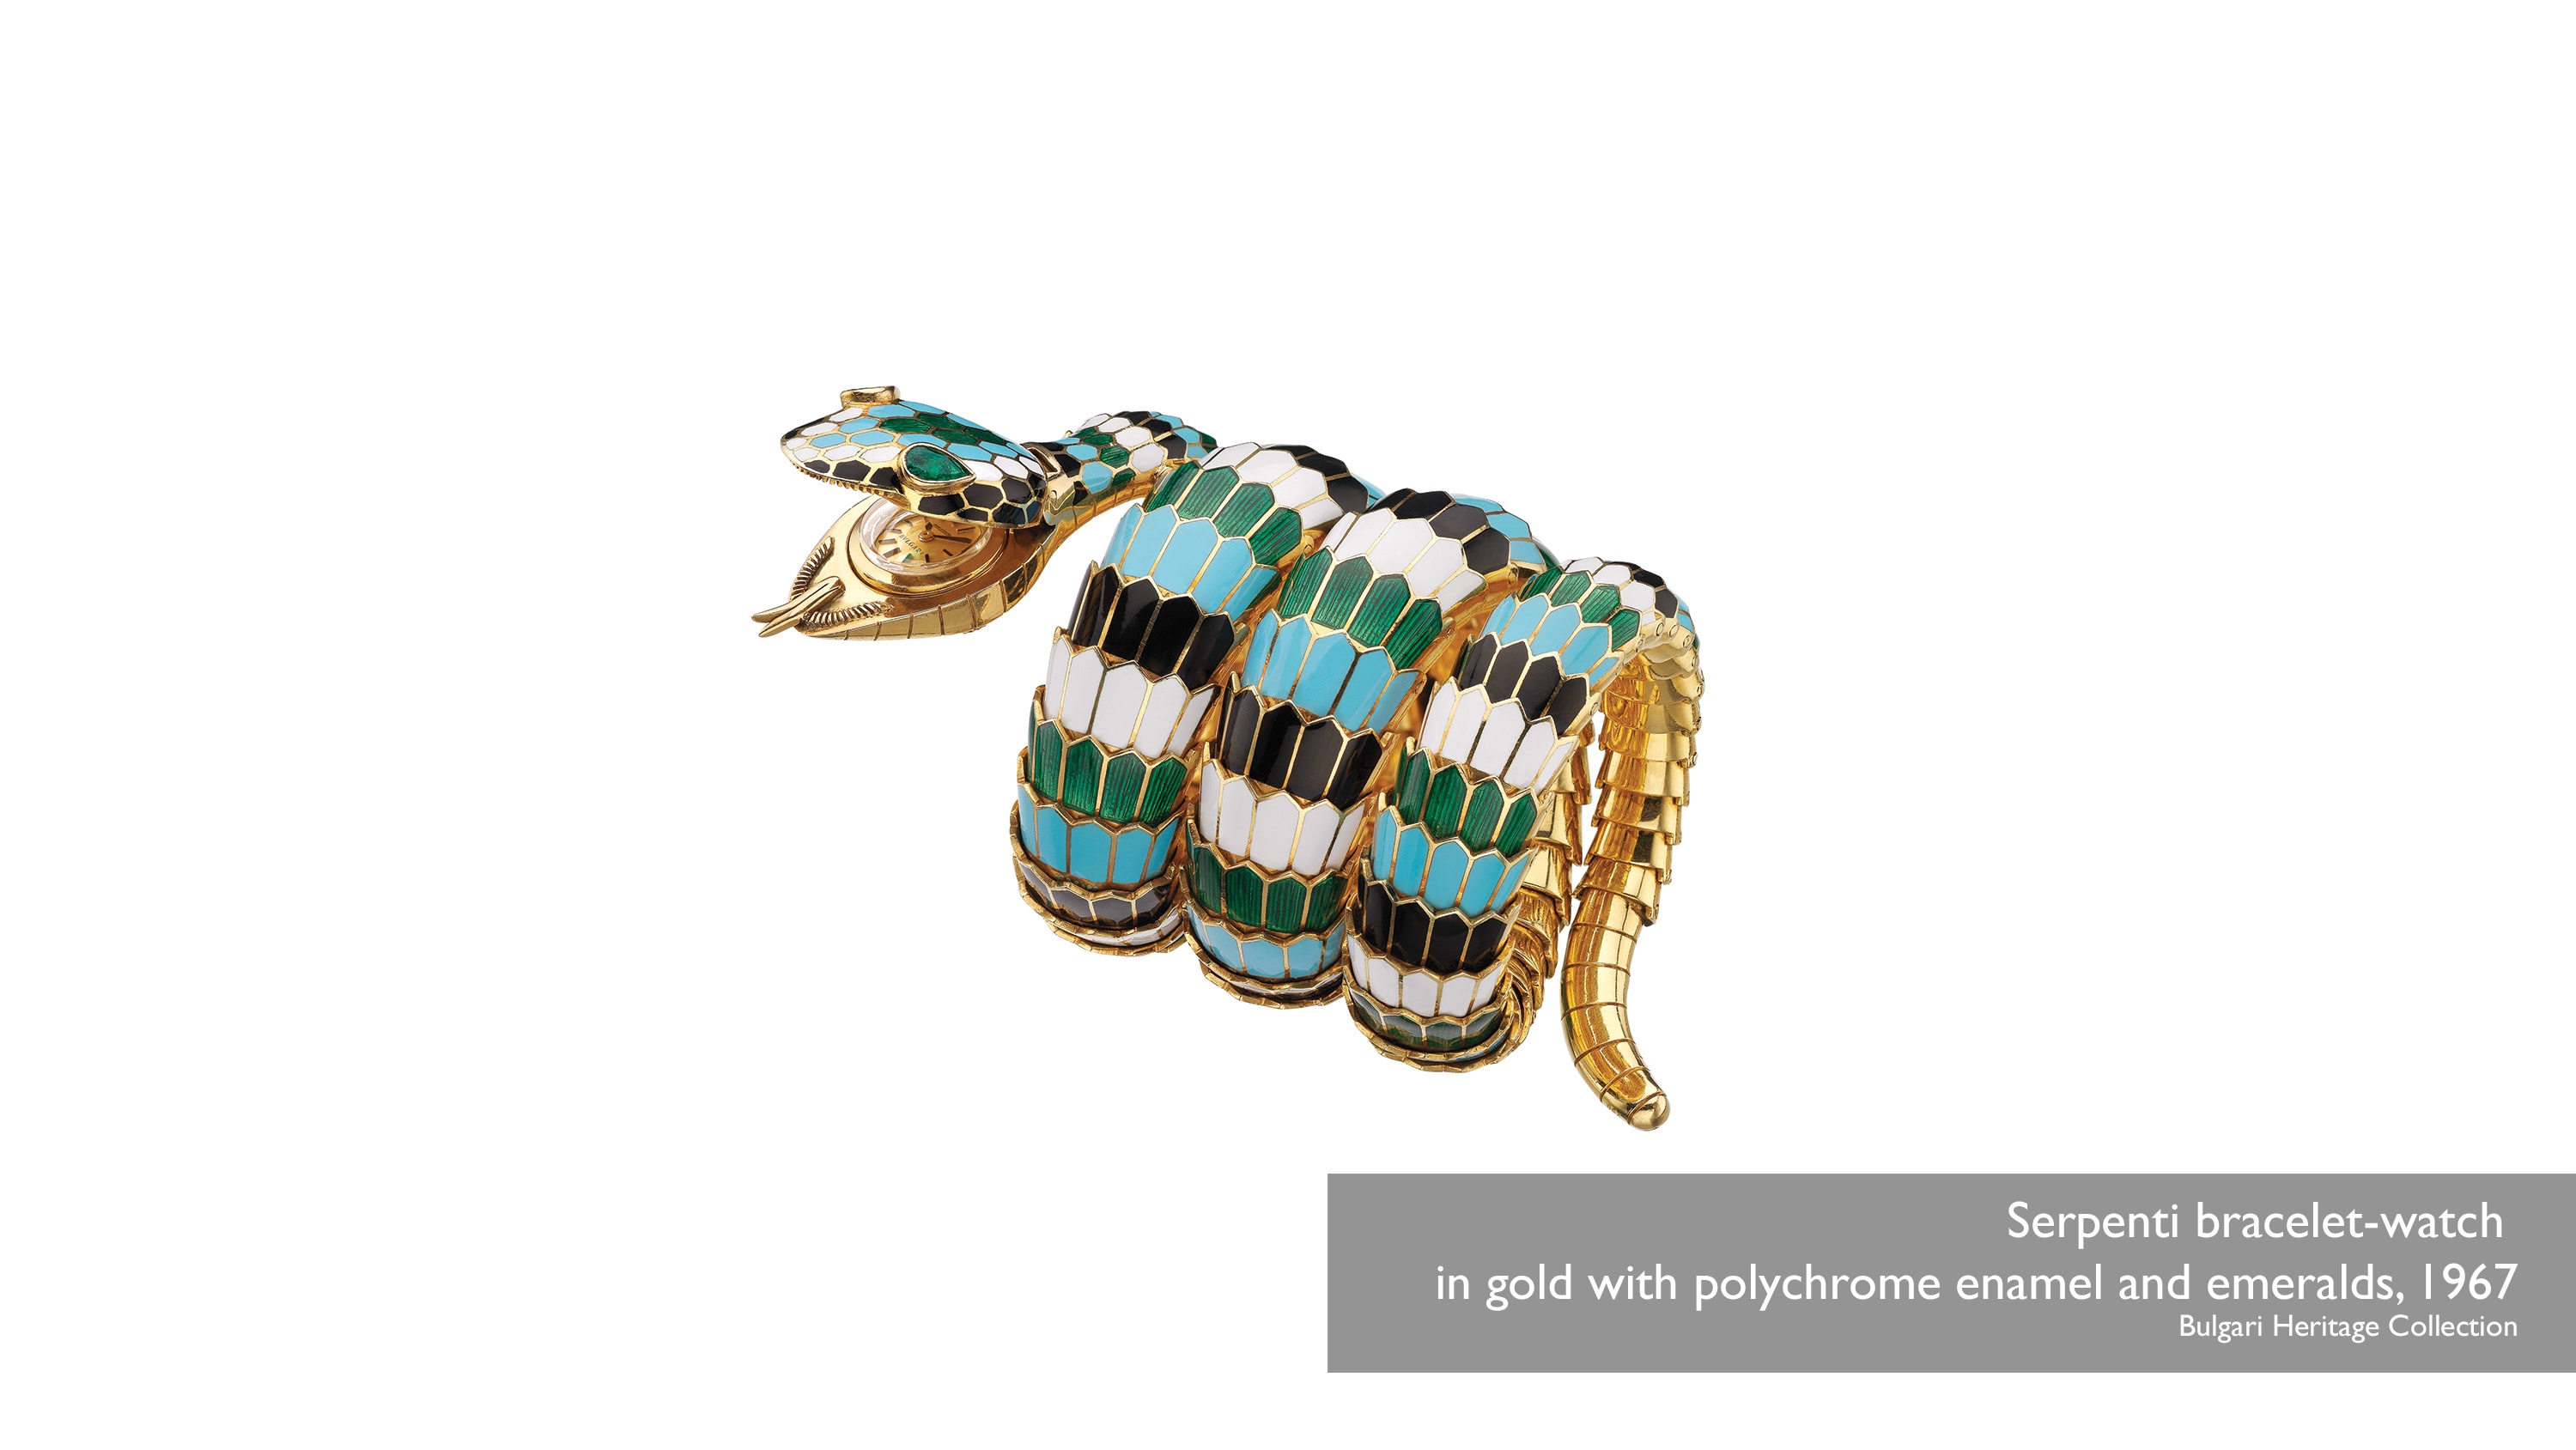 Serpenti bracelet-watch in gold with polychrome enamel and emeralds, 1967 Bulgari Heritage Collection